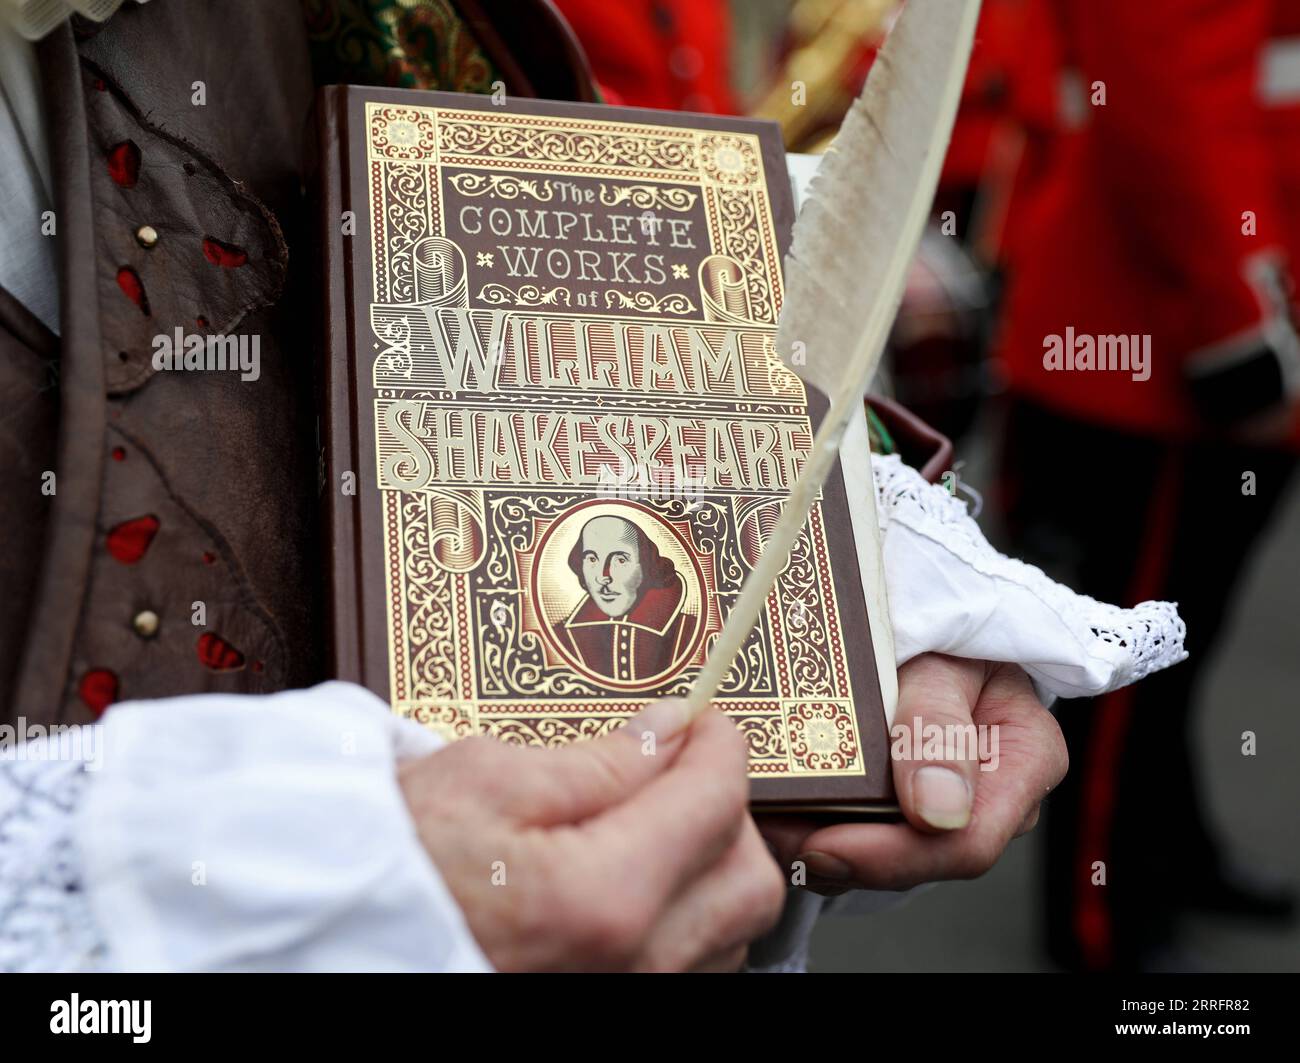 220424 -- STRATFORD UPON AVON, April 24, 2022 -- A man cosplays as Shakespeare, holding the Complete Works of William Shakespeare in celebration of William Shakespeare s 458th birthday in Stratford-upon-Avon, Britain, April 23, 2022. Over 1,000 people gathered at Stratford-upon-Avon, the hometown of William Shakespeare, to celebrate the British playwright s 458th birthday on Saturday.  BRITAIN-STRATFORD UPON AVON-SHAKESPEARE-CELEBRATION LixYing PUBLICATIONxNOTxINxCHN Stock Photo